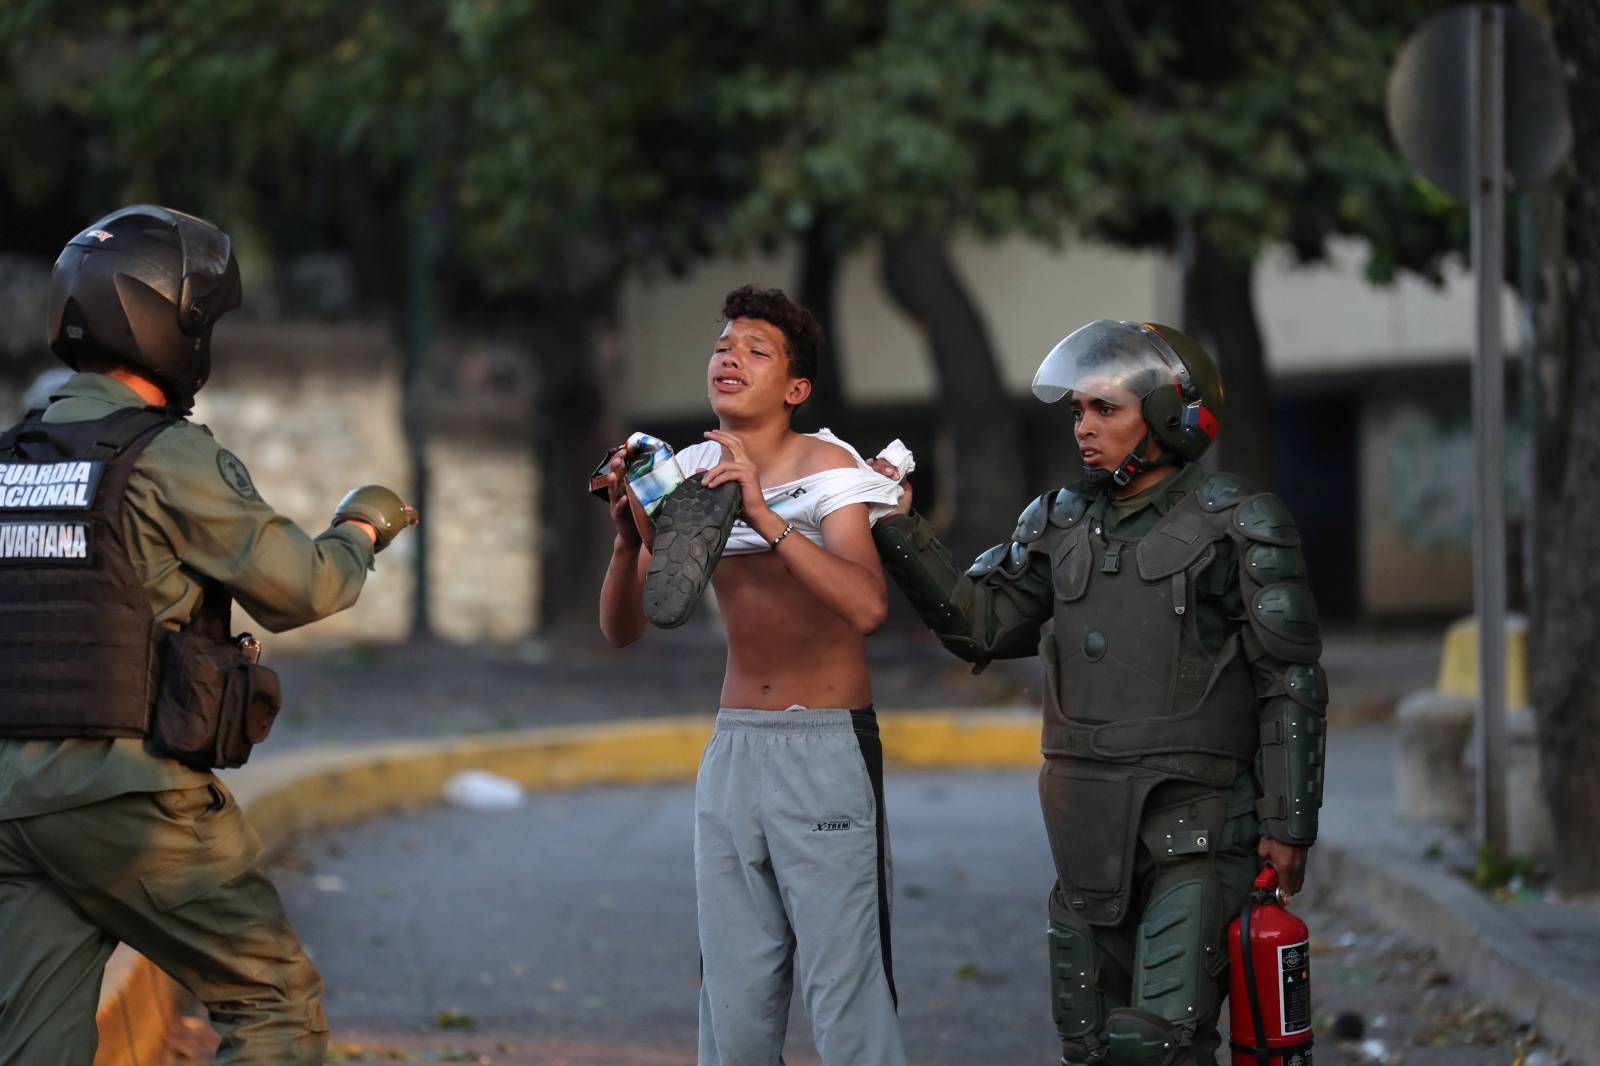 A youth reacts as he is detained by security forces after looting broke out during an ongoing blackout in Caracas